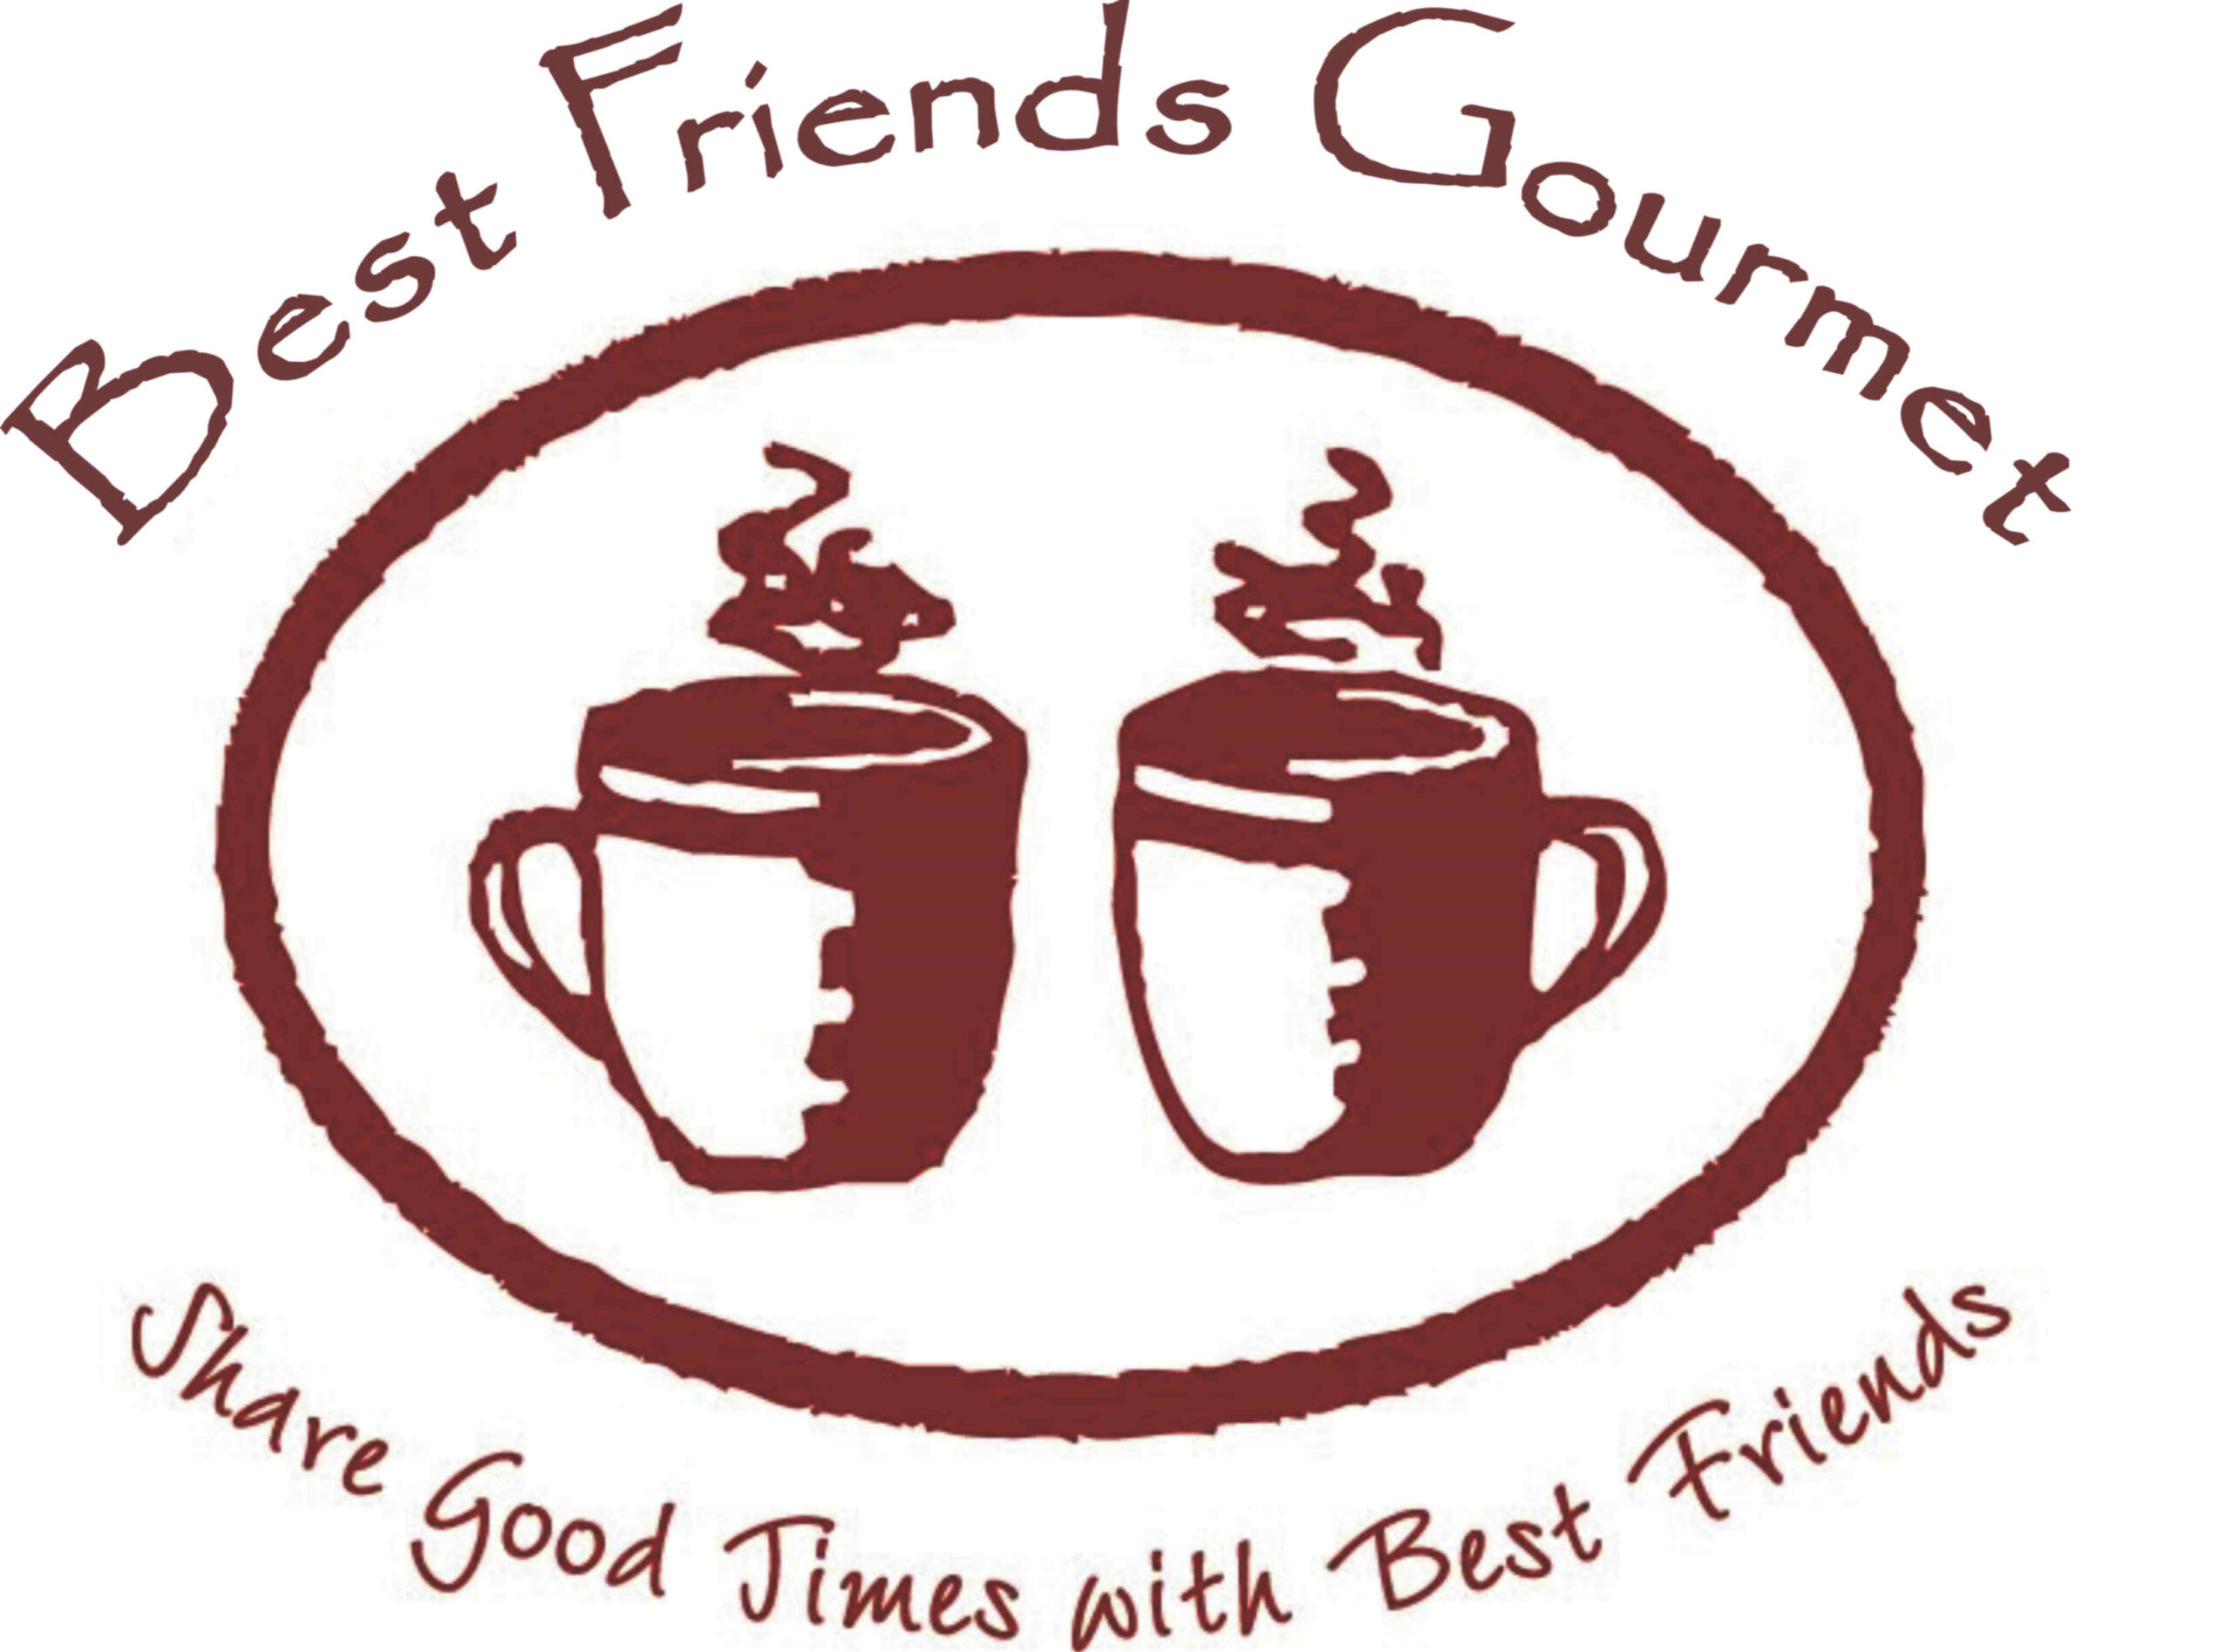 A logo for the best friends gourmet coffee shop.